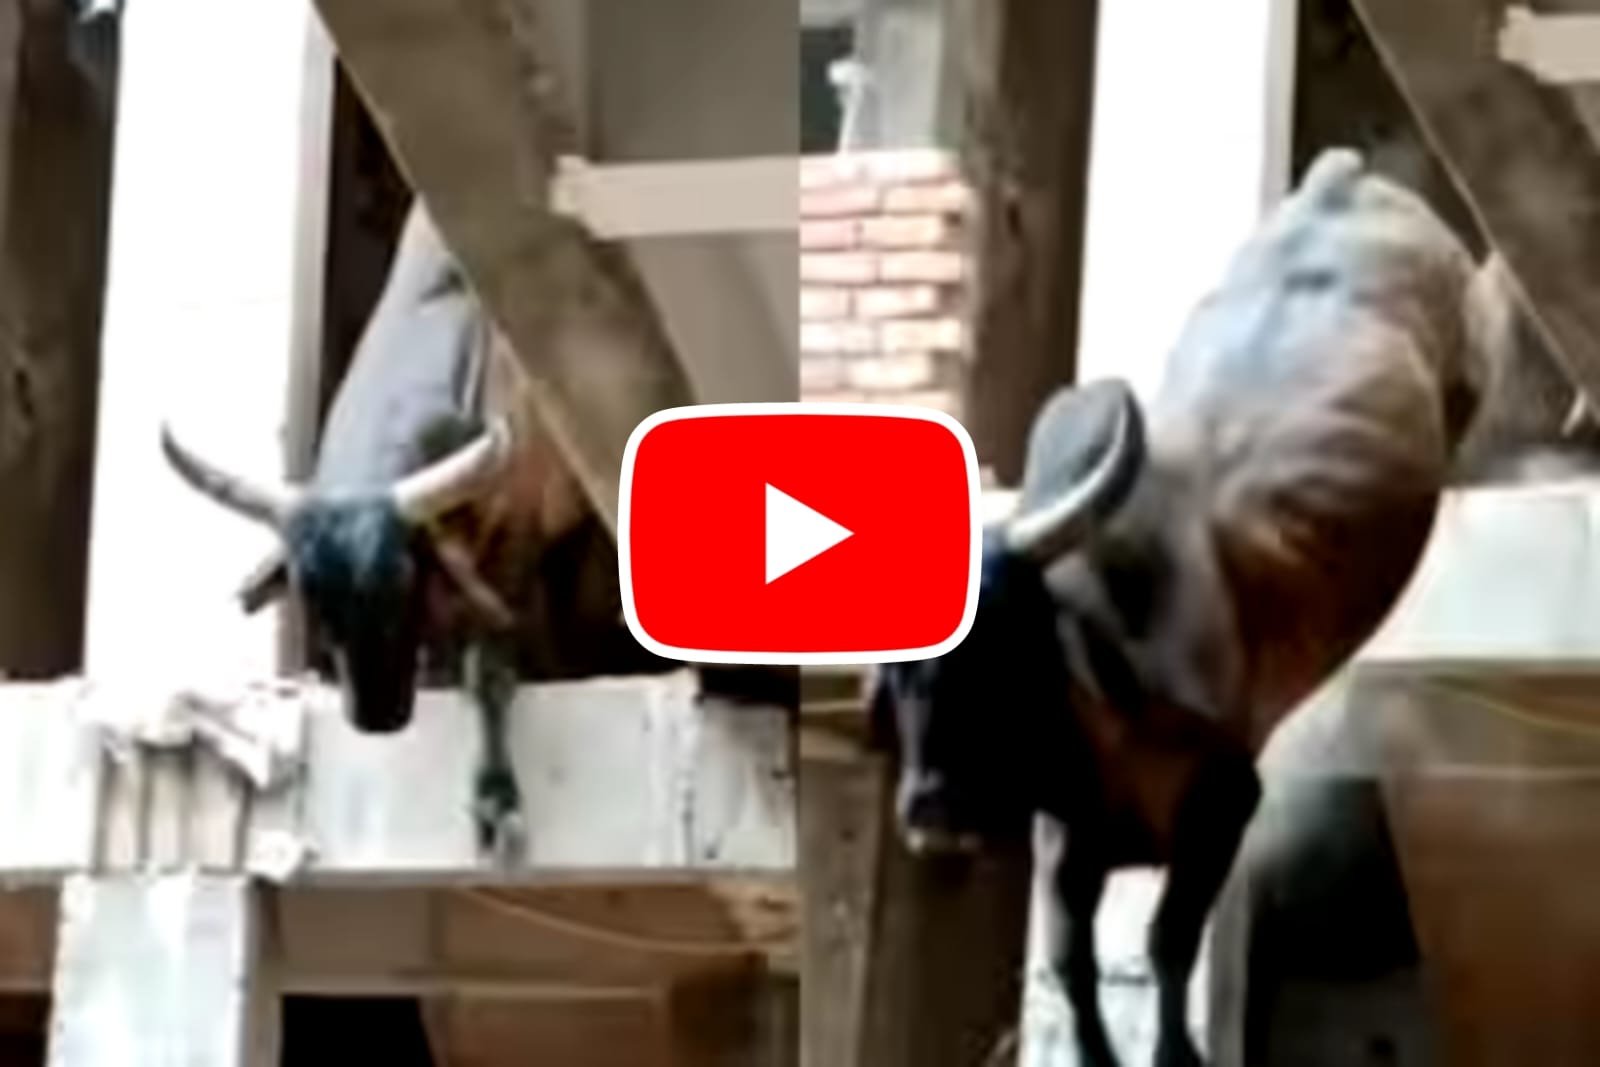 Saand Ka Video: The bull jumped high to get down from the first floor.